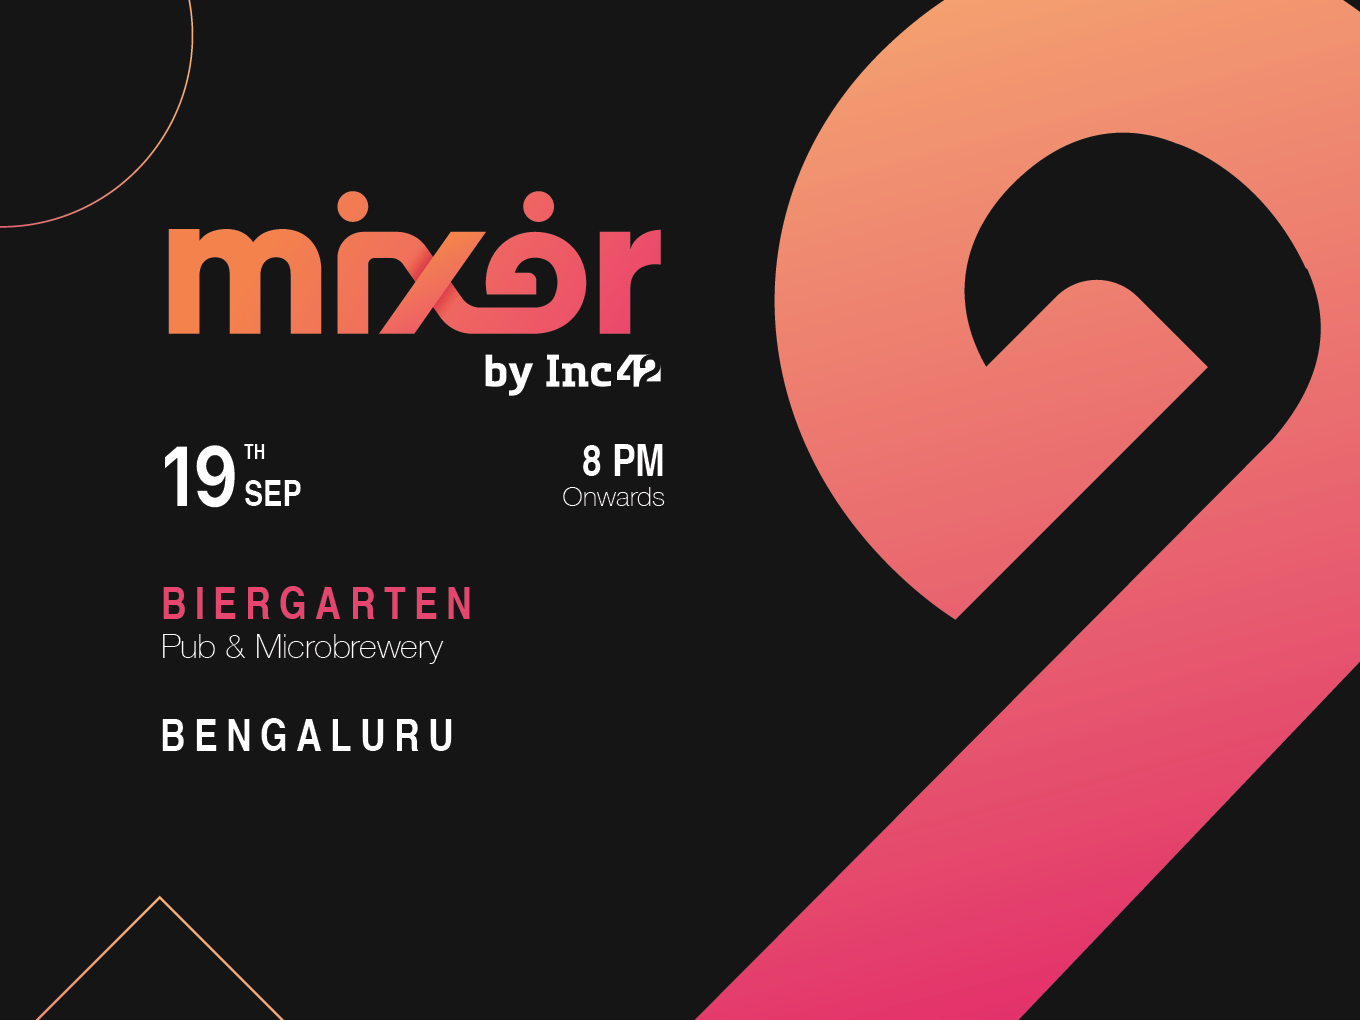 Inc42 Mixer In Bengaluru: Evening Of Ideas, Cocktails And Conversations